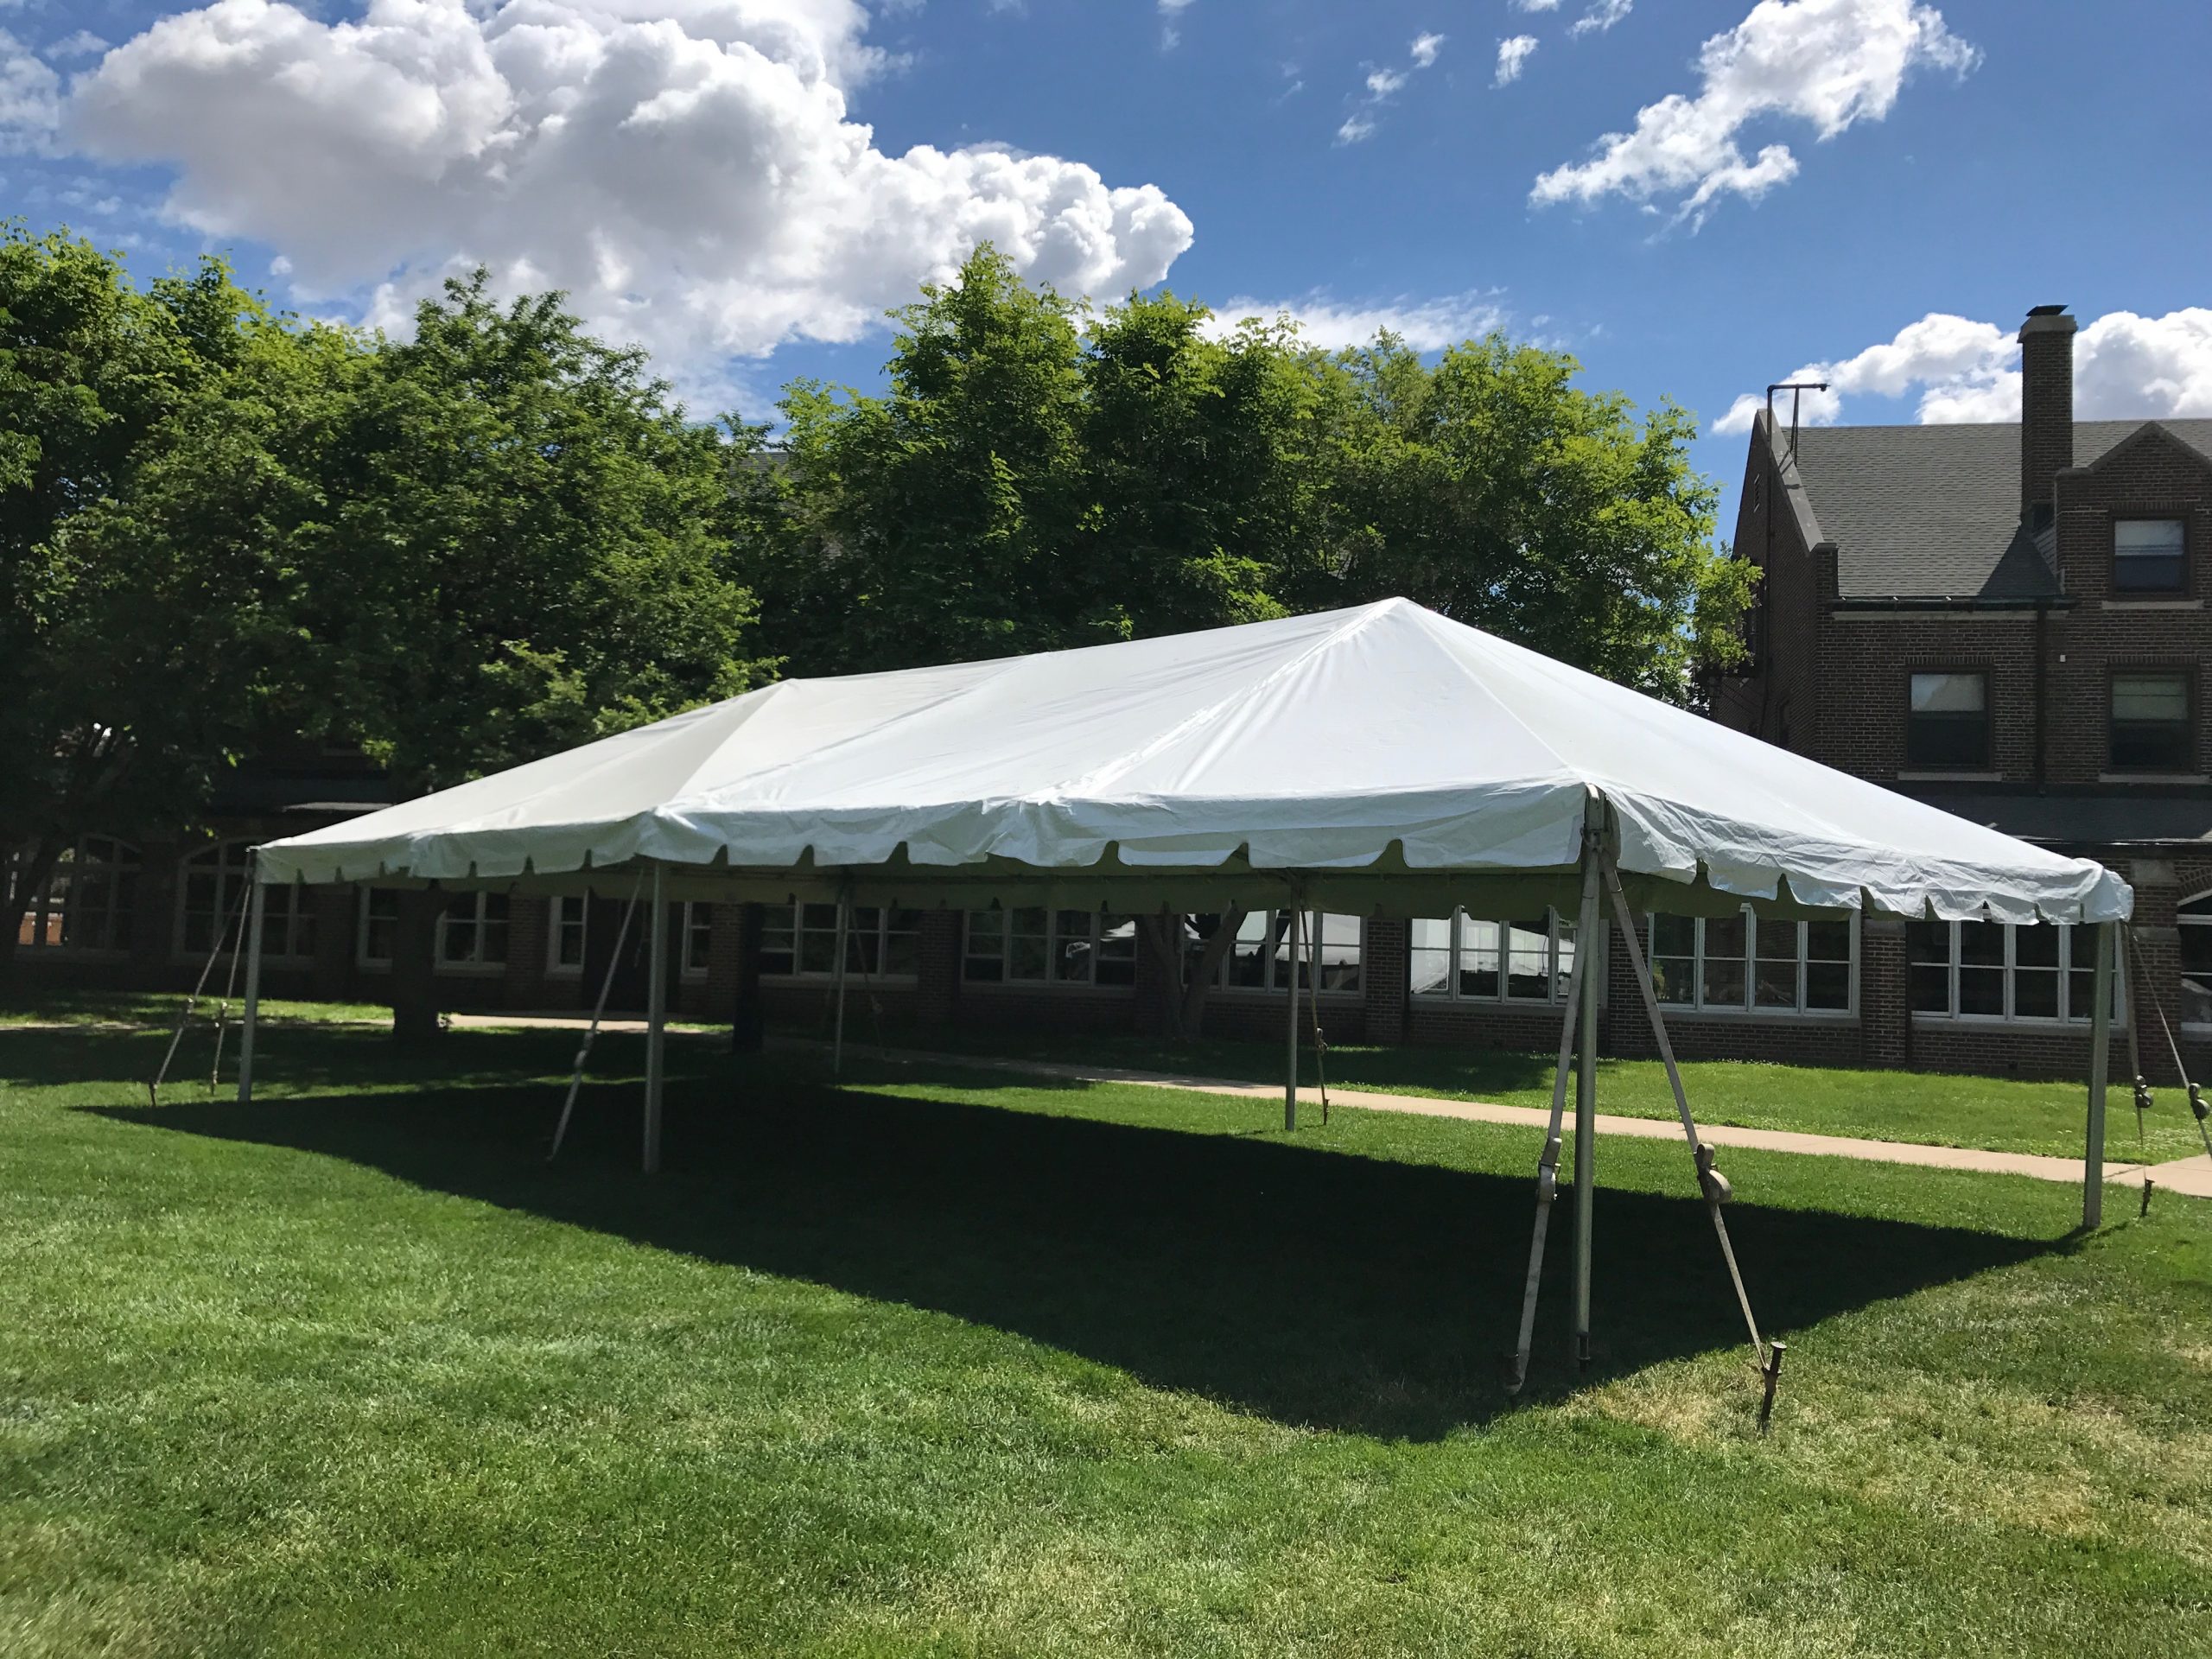 20' x 40' frame tent at Grinnell College